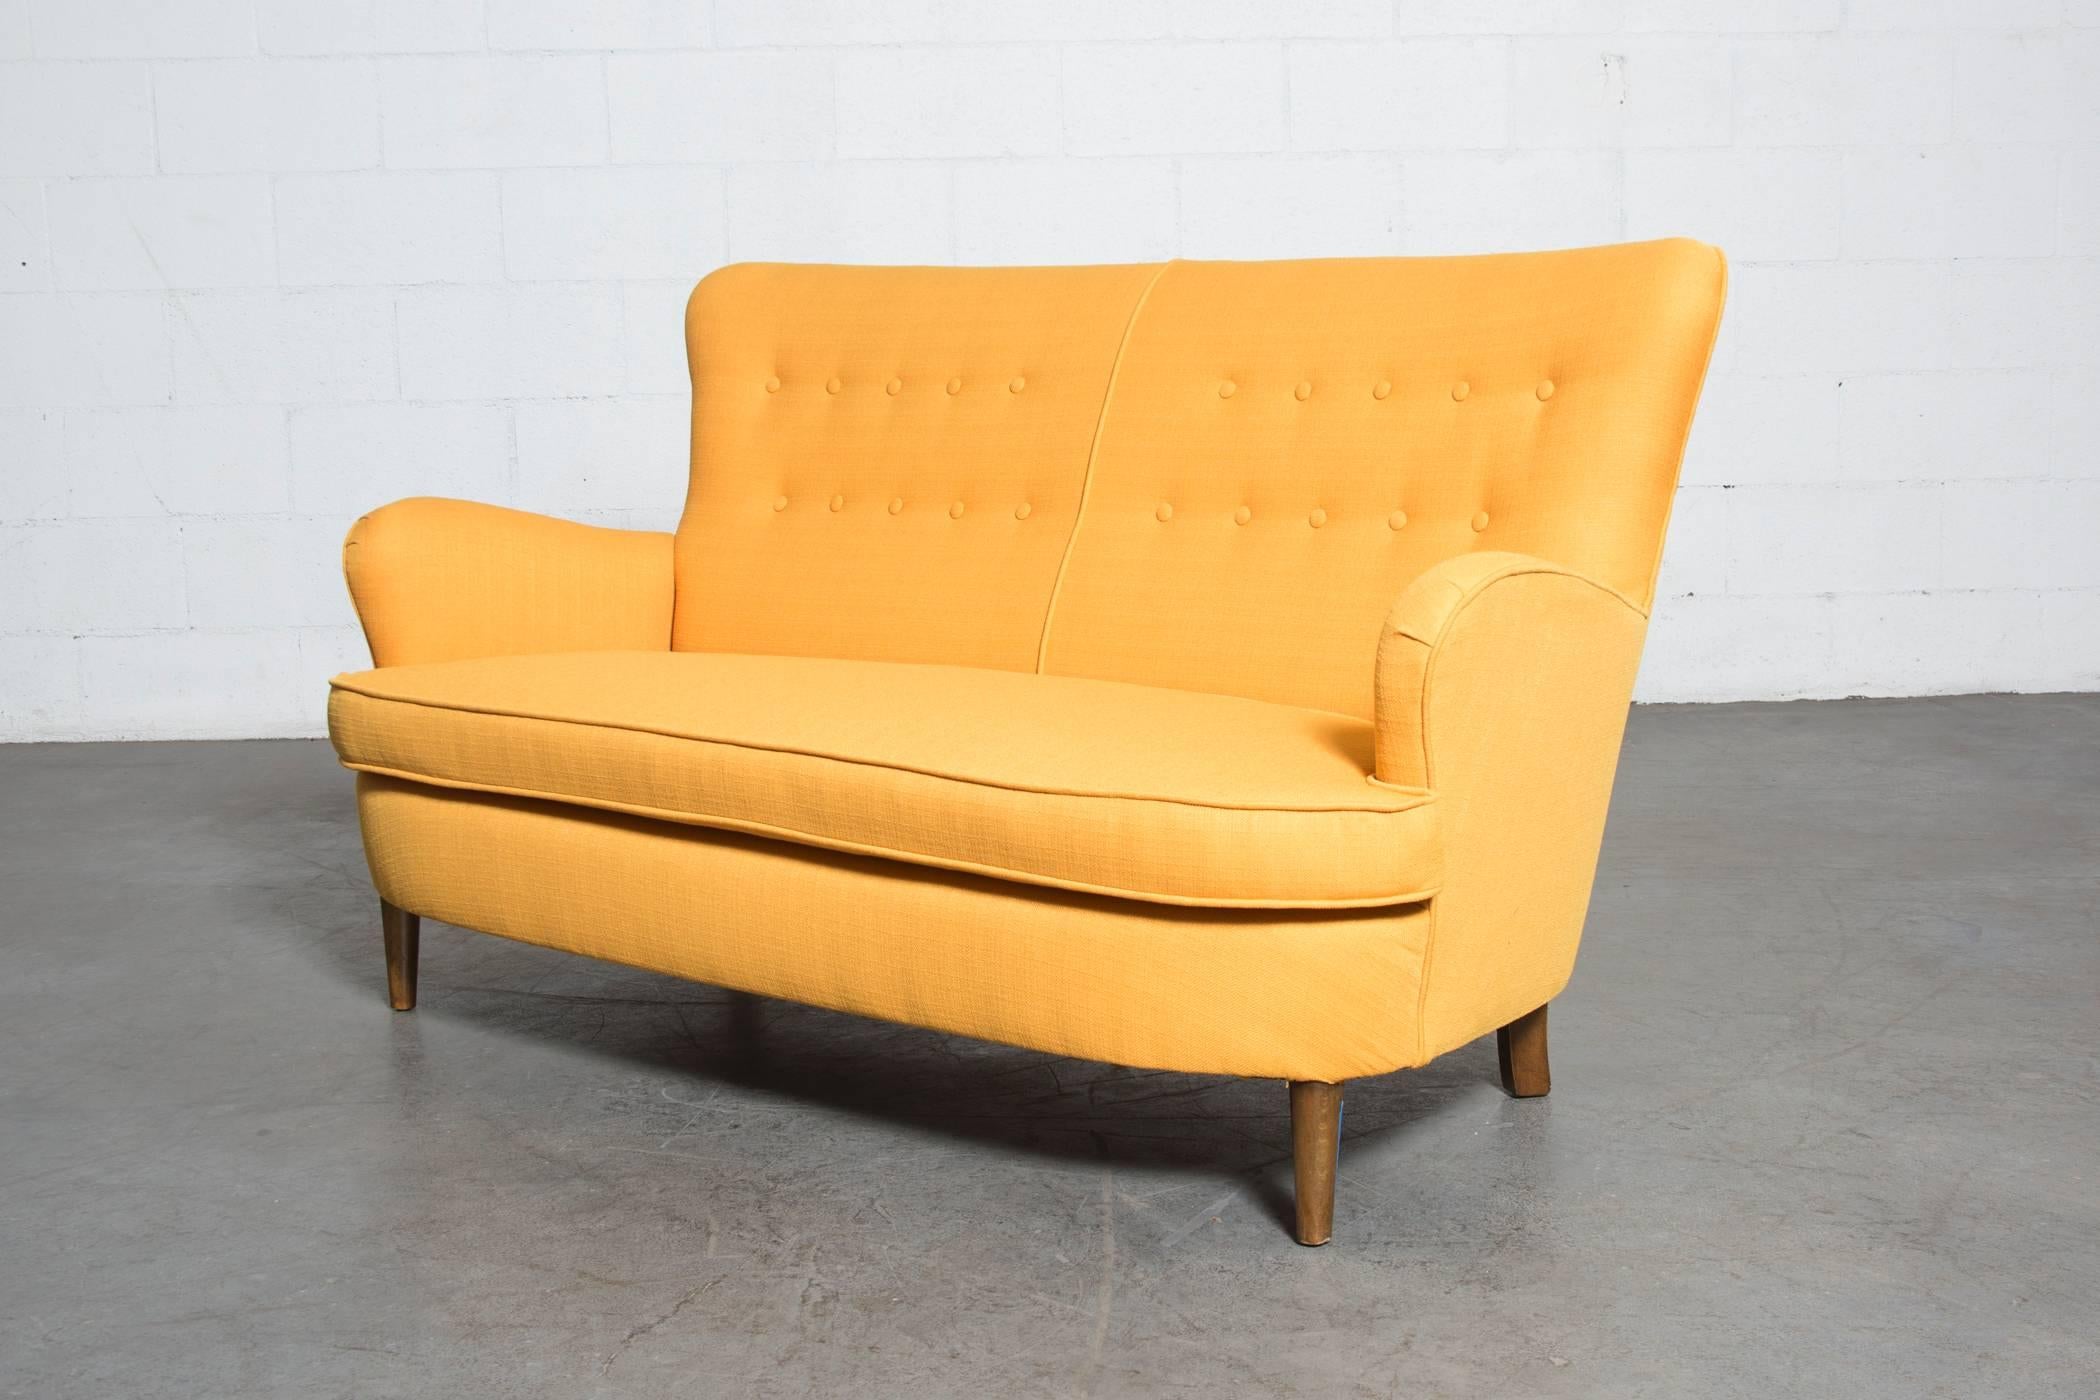 Fab sunshine yellow upholstered wingback sofa, great button detail, sweeping lines. Frame is in original condition with some wear to feet consistent with age and use.